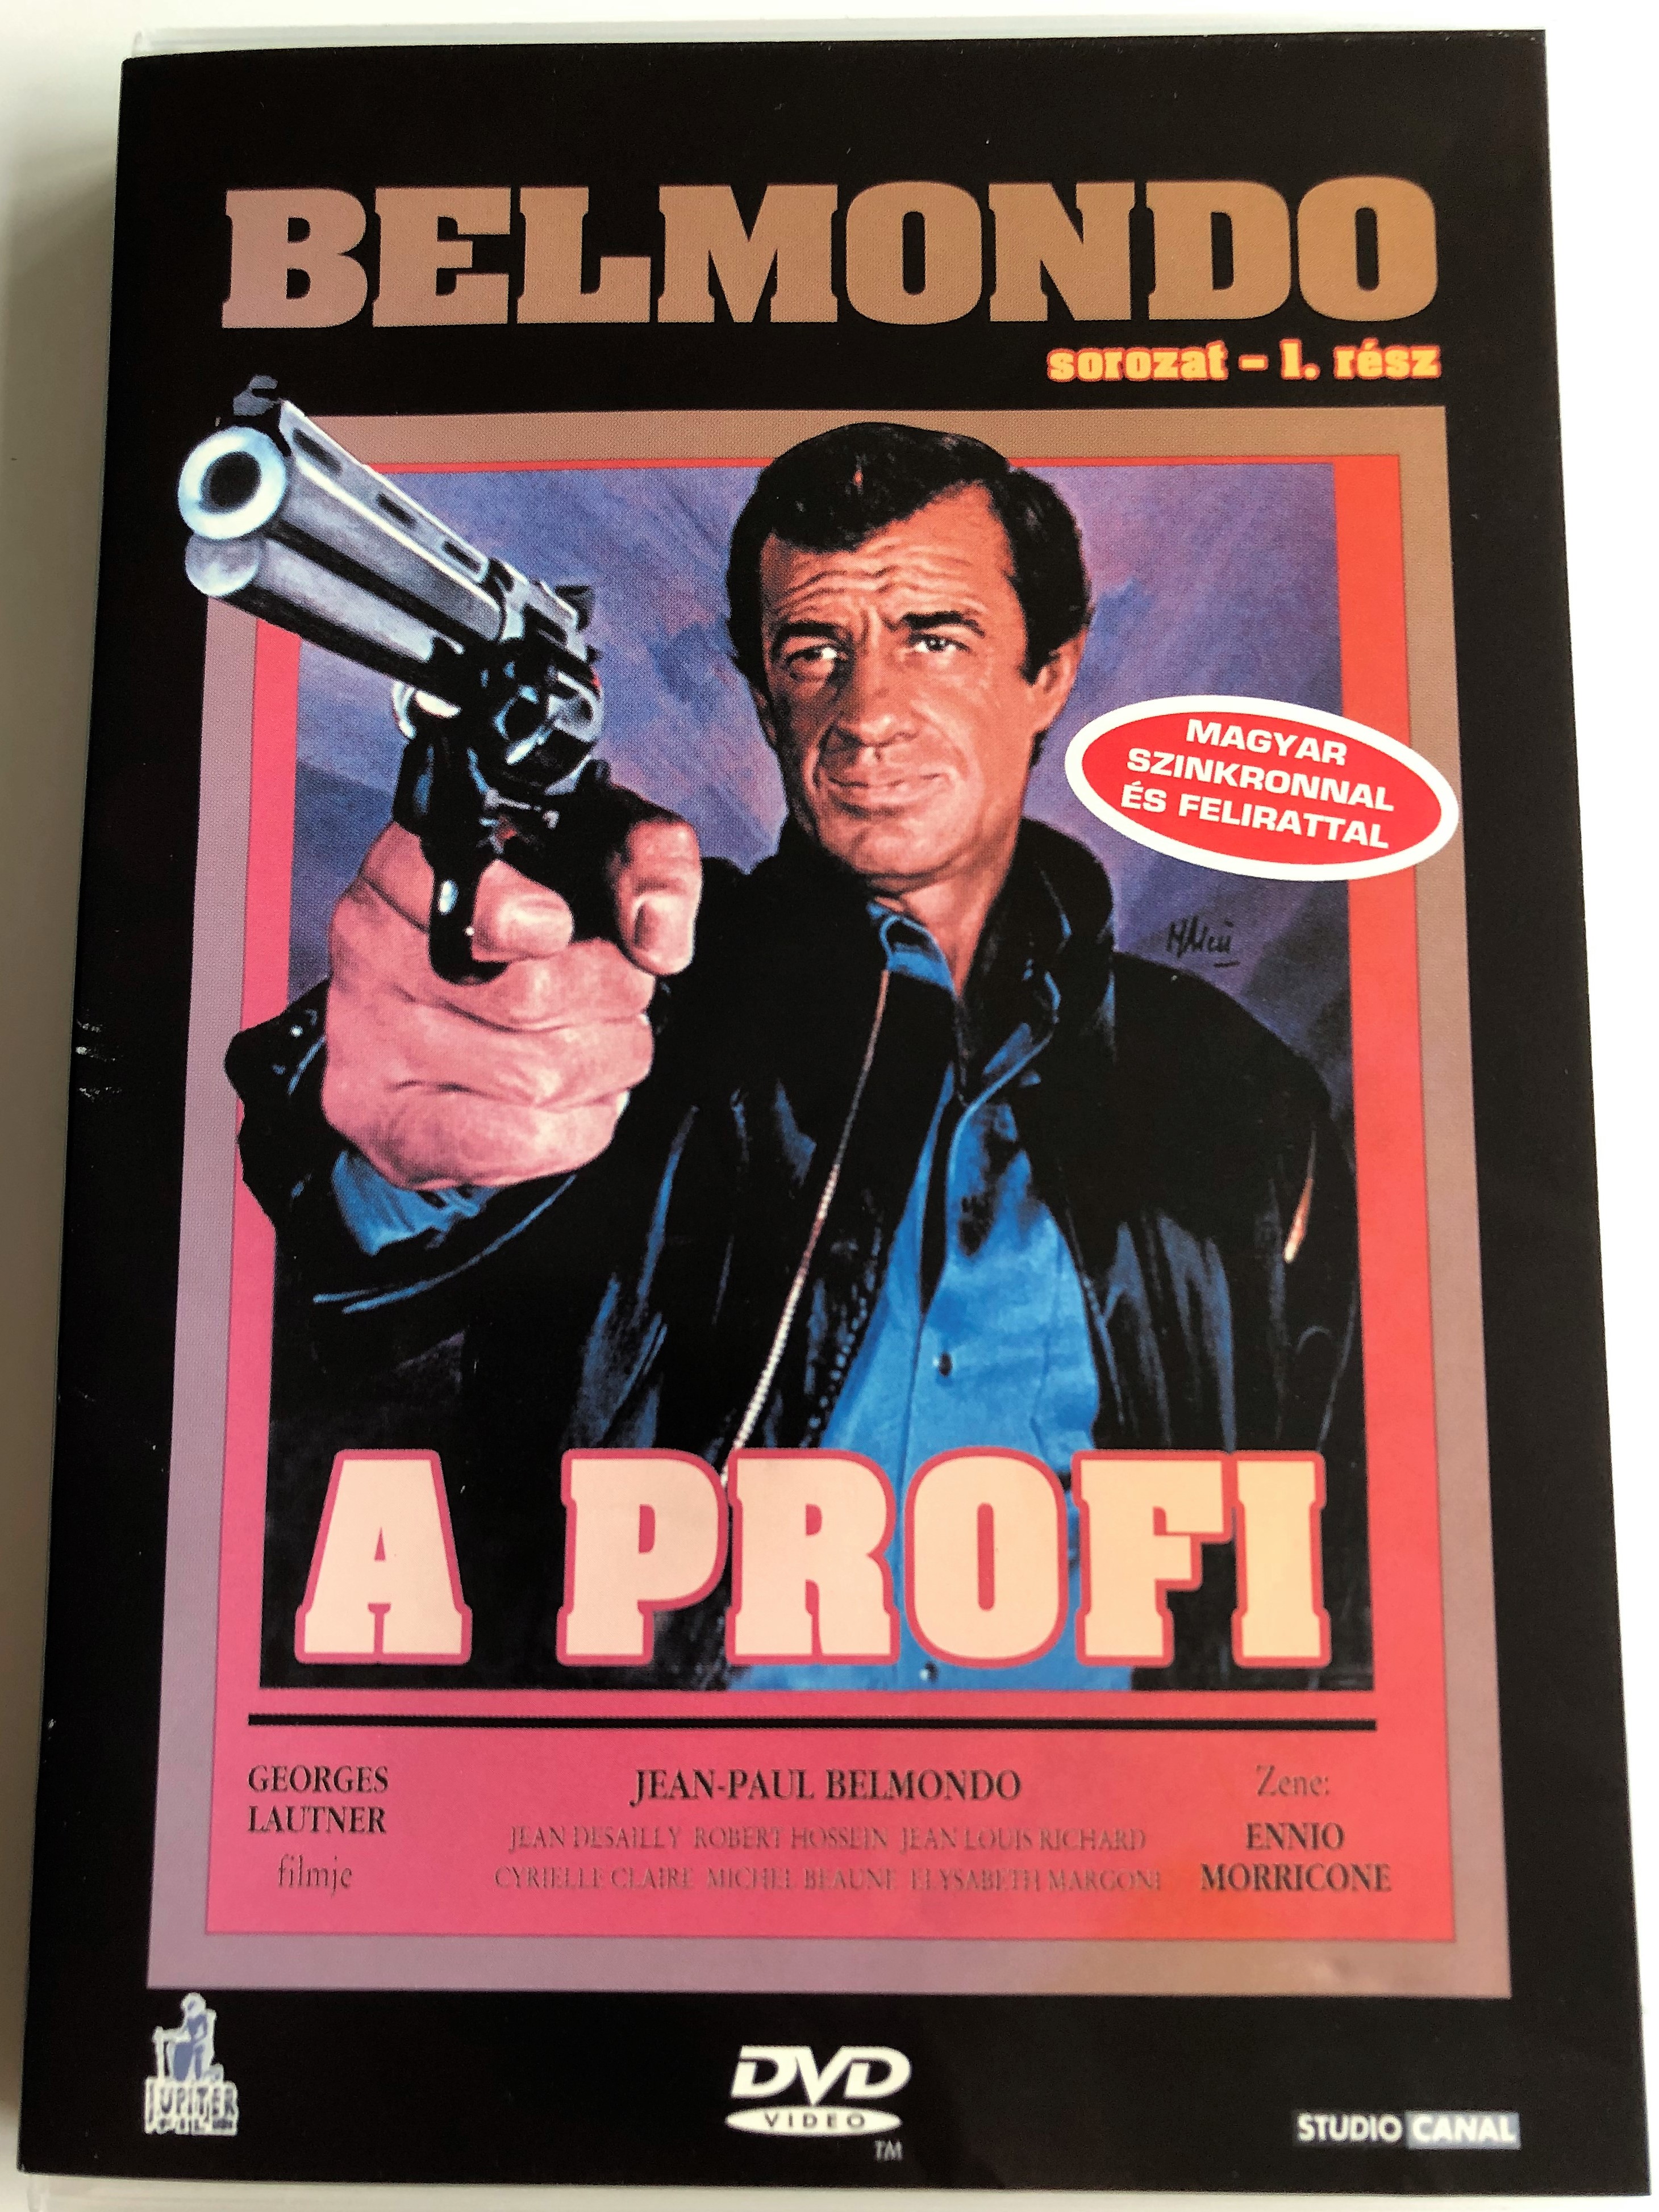 Le Professionnel DVD 1981 A Profi (The Professional) / Directed by